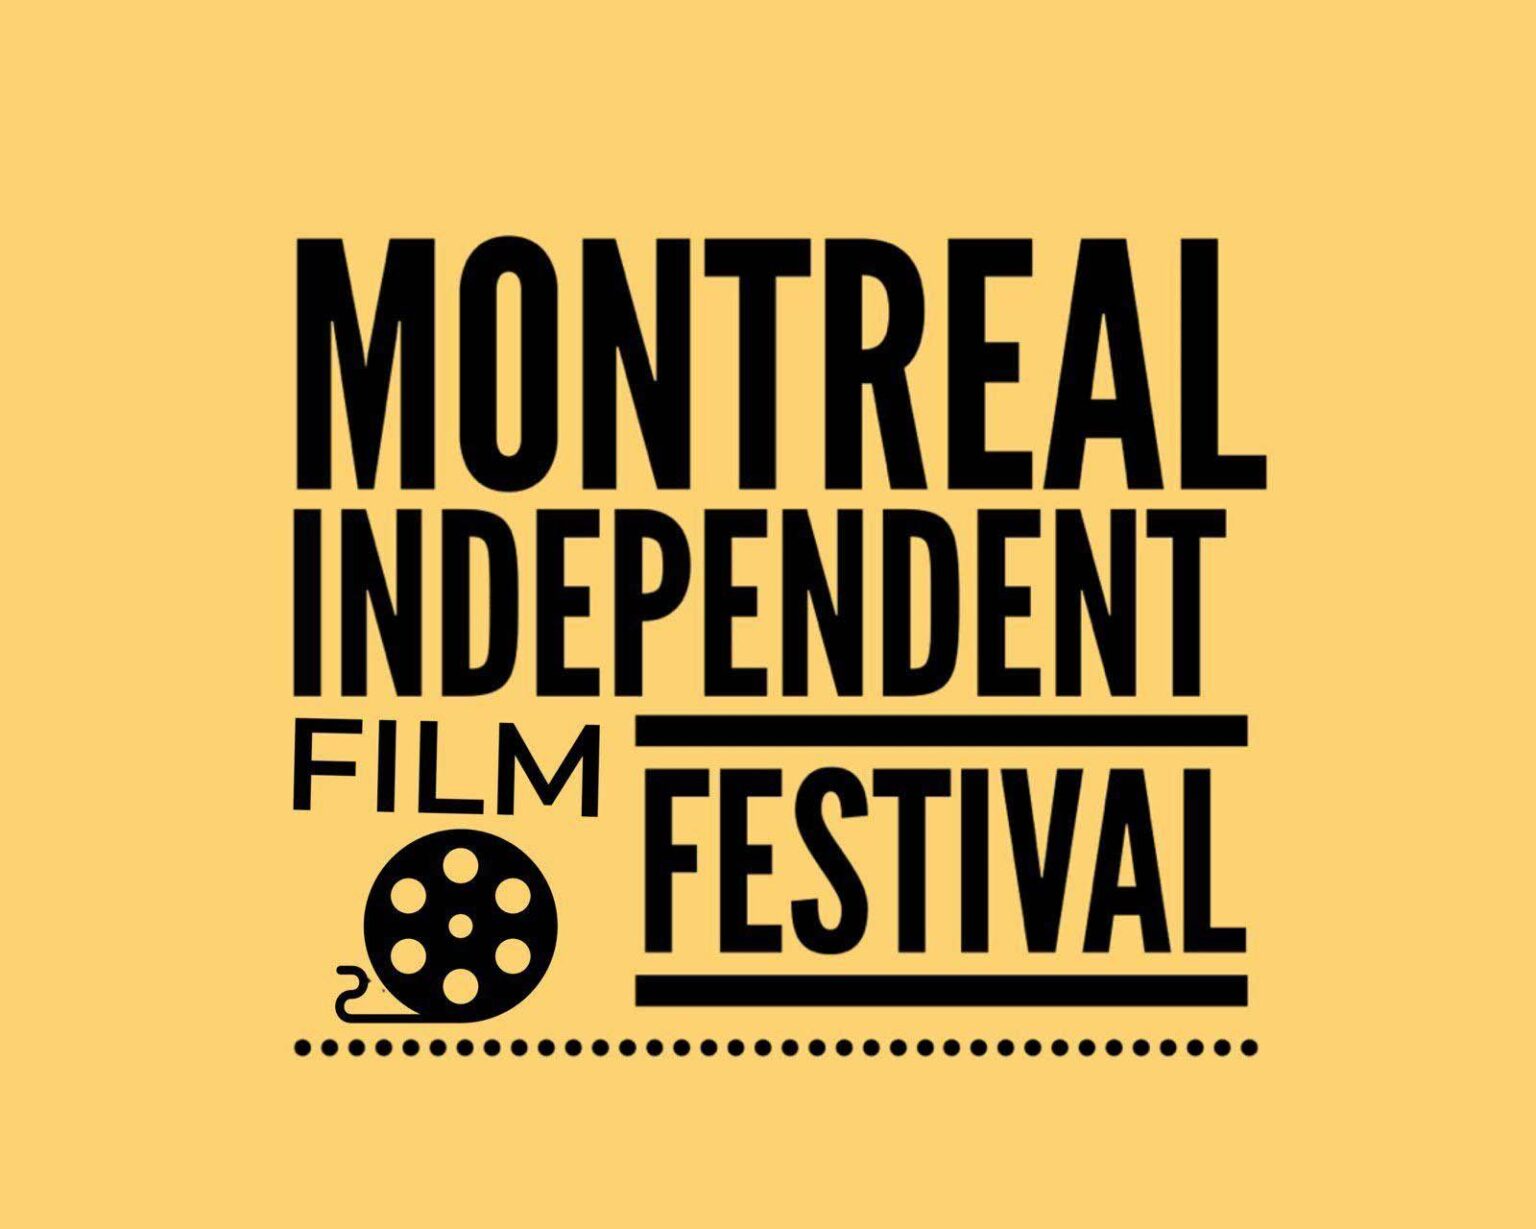 The Montreal Independent Film Festival is both an annual and monthly fair to international short and feature length films.